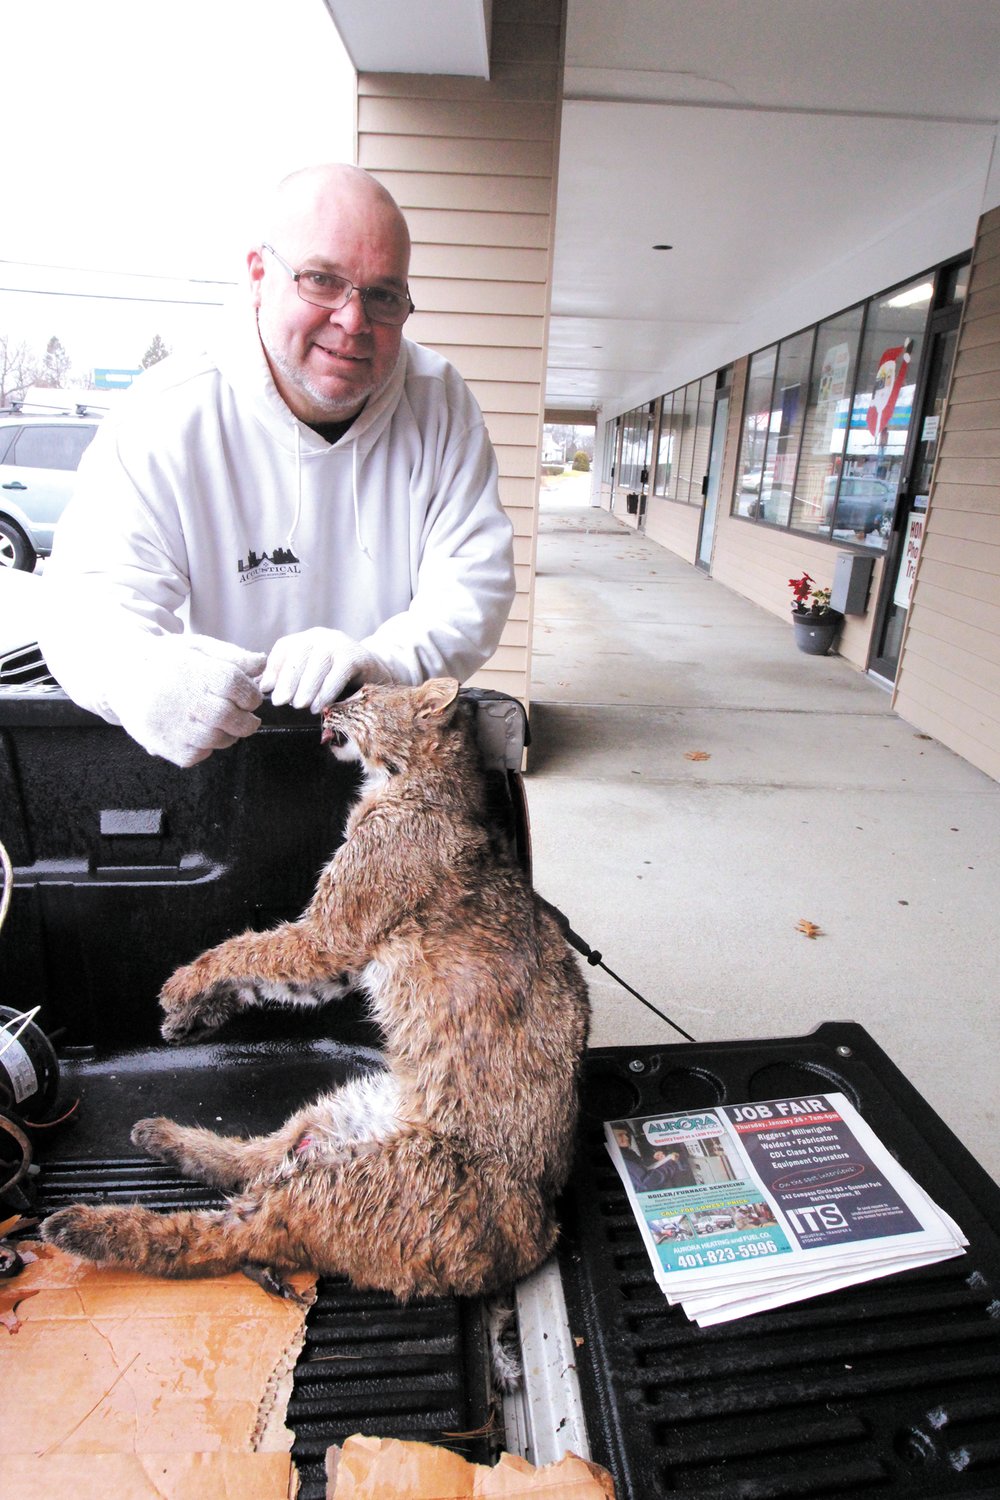 CAT’S IN THE TRUCK: Warwick resident and wildlife enthusiast Arthur Dunn spotted this dead bobcat on the side of Interstate 295 in Johnston. He picked it up to take to RI DEM scientists, hoping they could learn something about the animal. Bobcat sightings are on the rise in Rhode Island, and researchers are looking into the reasons why.